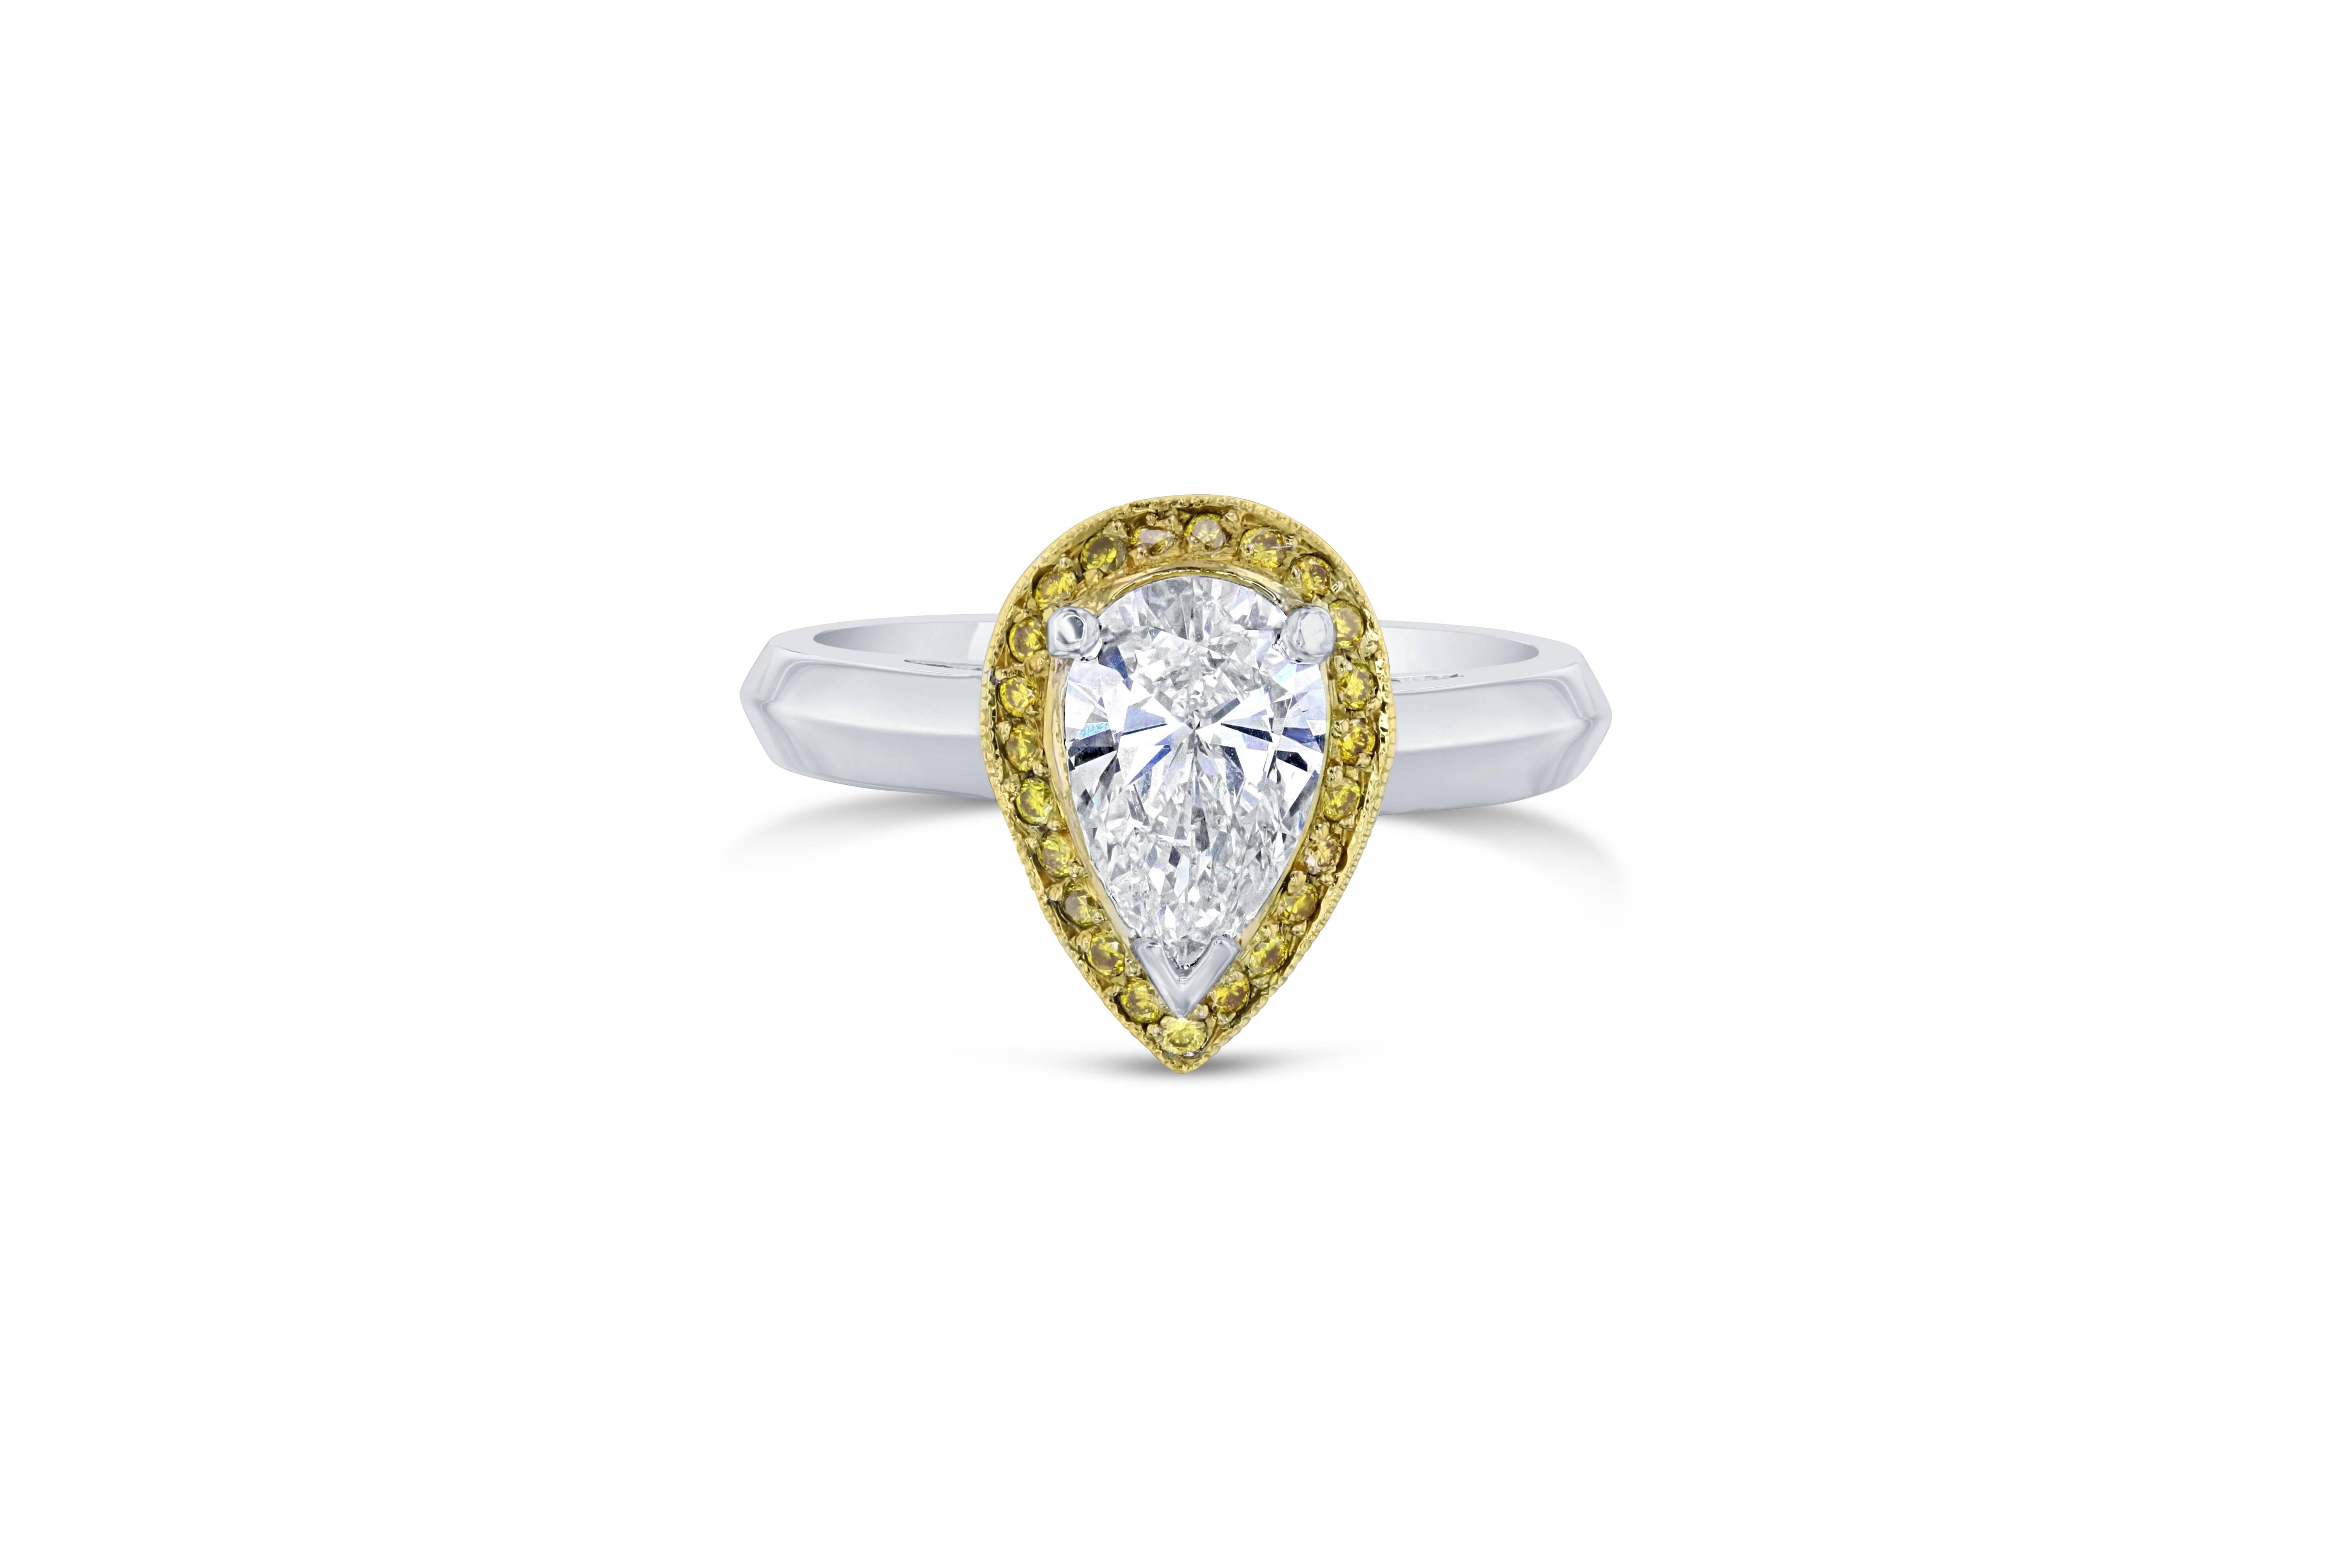 Stunning Pear Cut Diamond Ring! 

The center Pear Cut Diamond is 1.05 Carats surrounded by 23 Natural Yellow Diamonds that weigh 0.13 Carats. The total carat weight of the ring is 1.18 Carats. 

It is set in 14K White Gold and is 5.5 grams. The ring